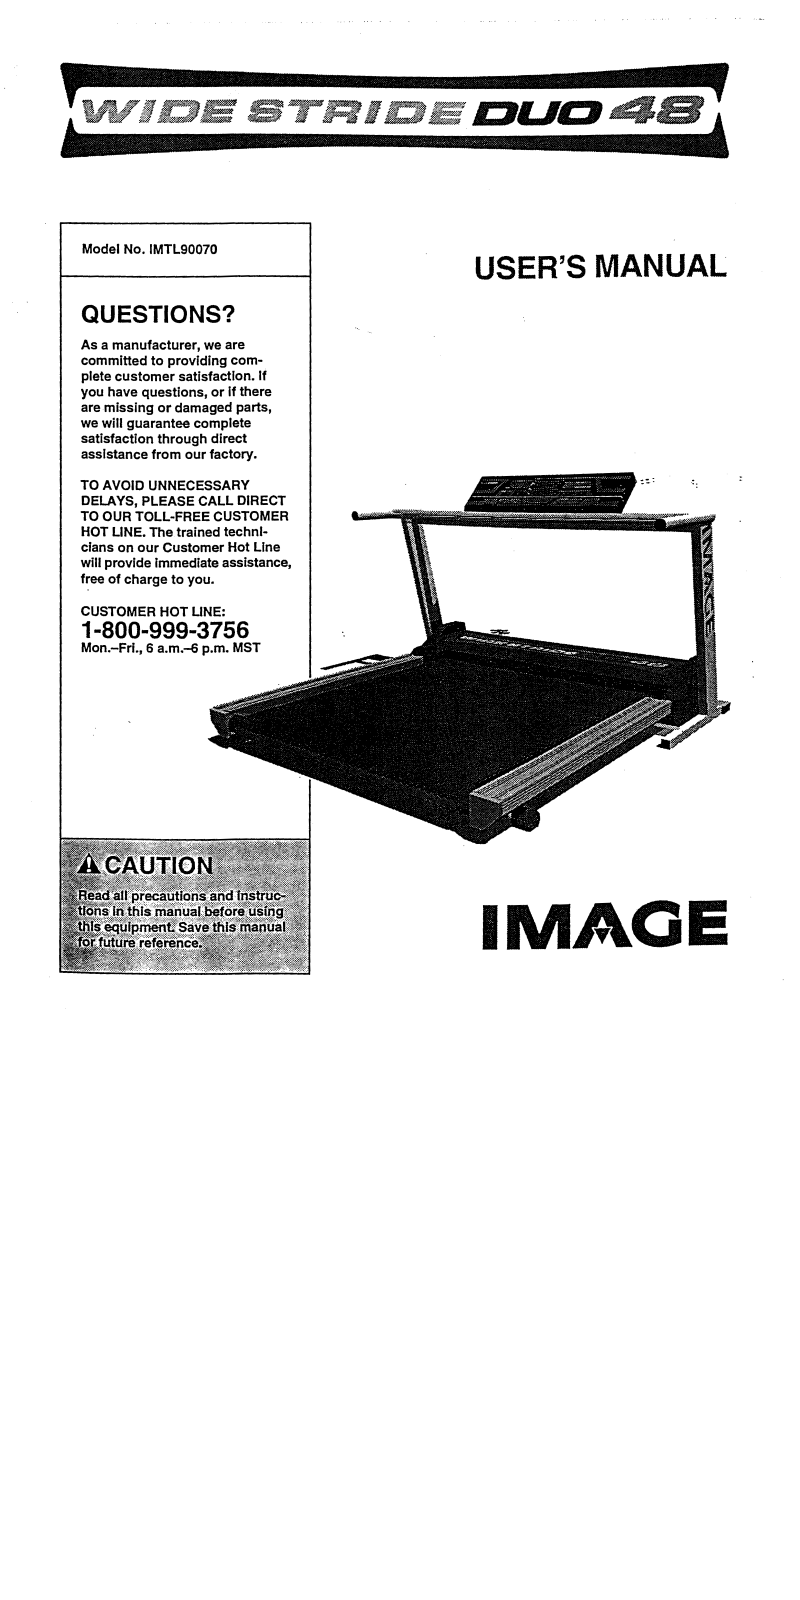 Image IMTL90070 Owner's Manual